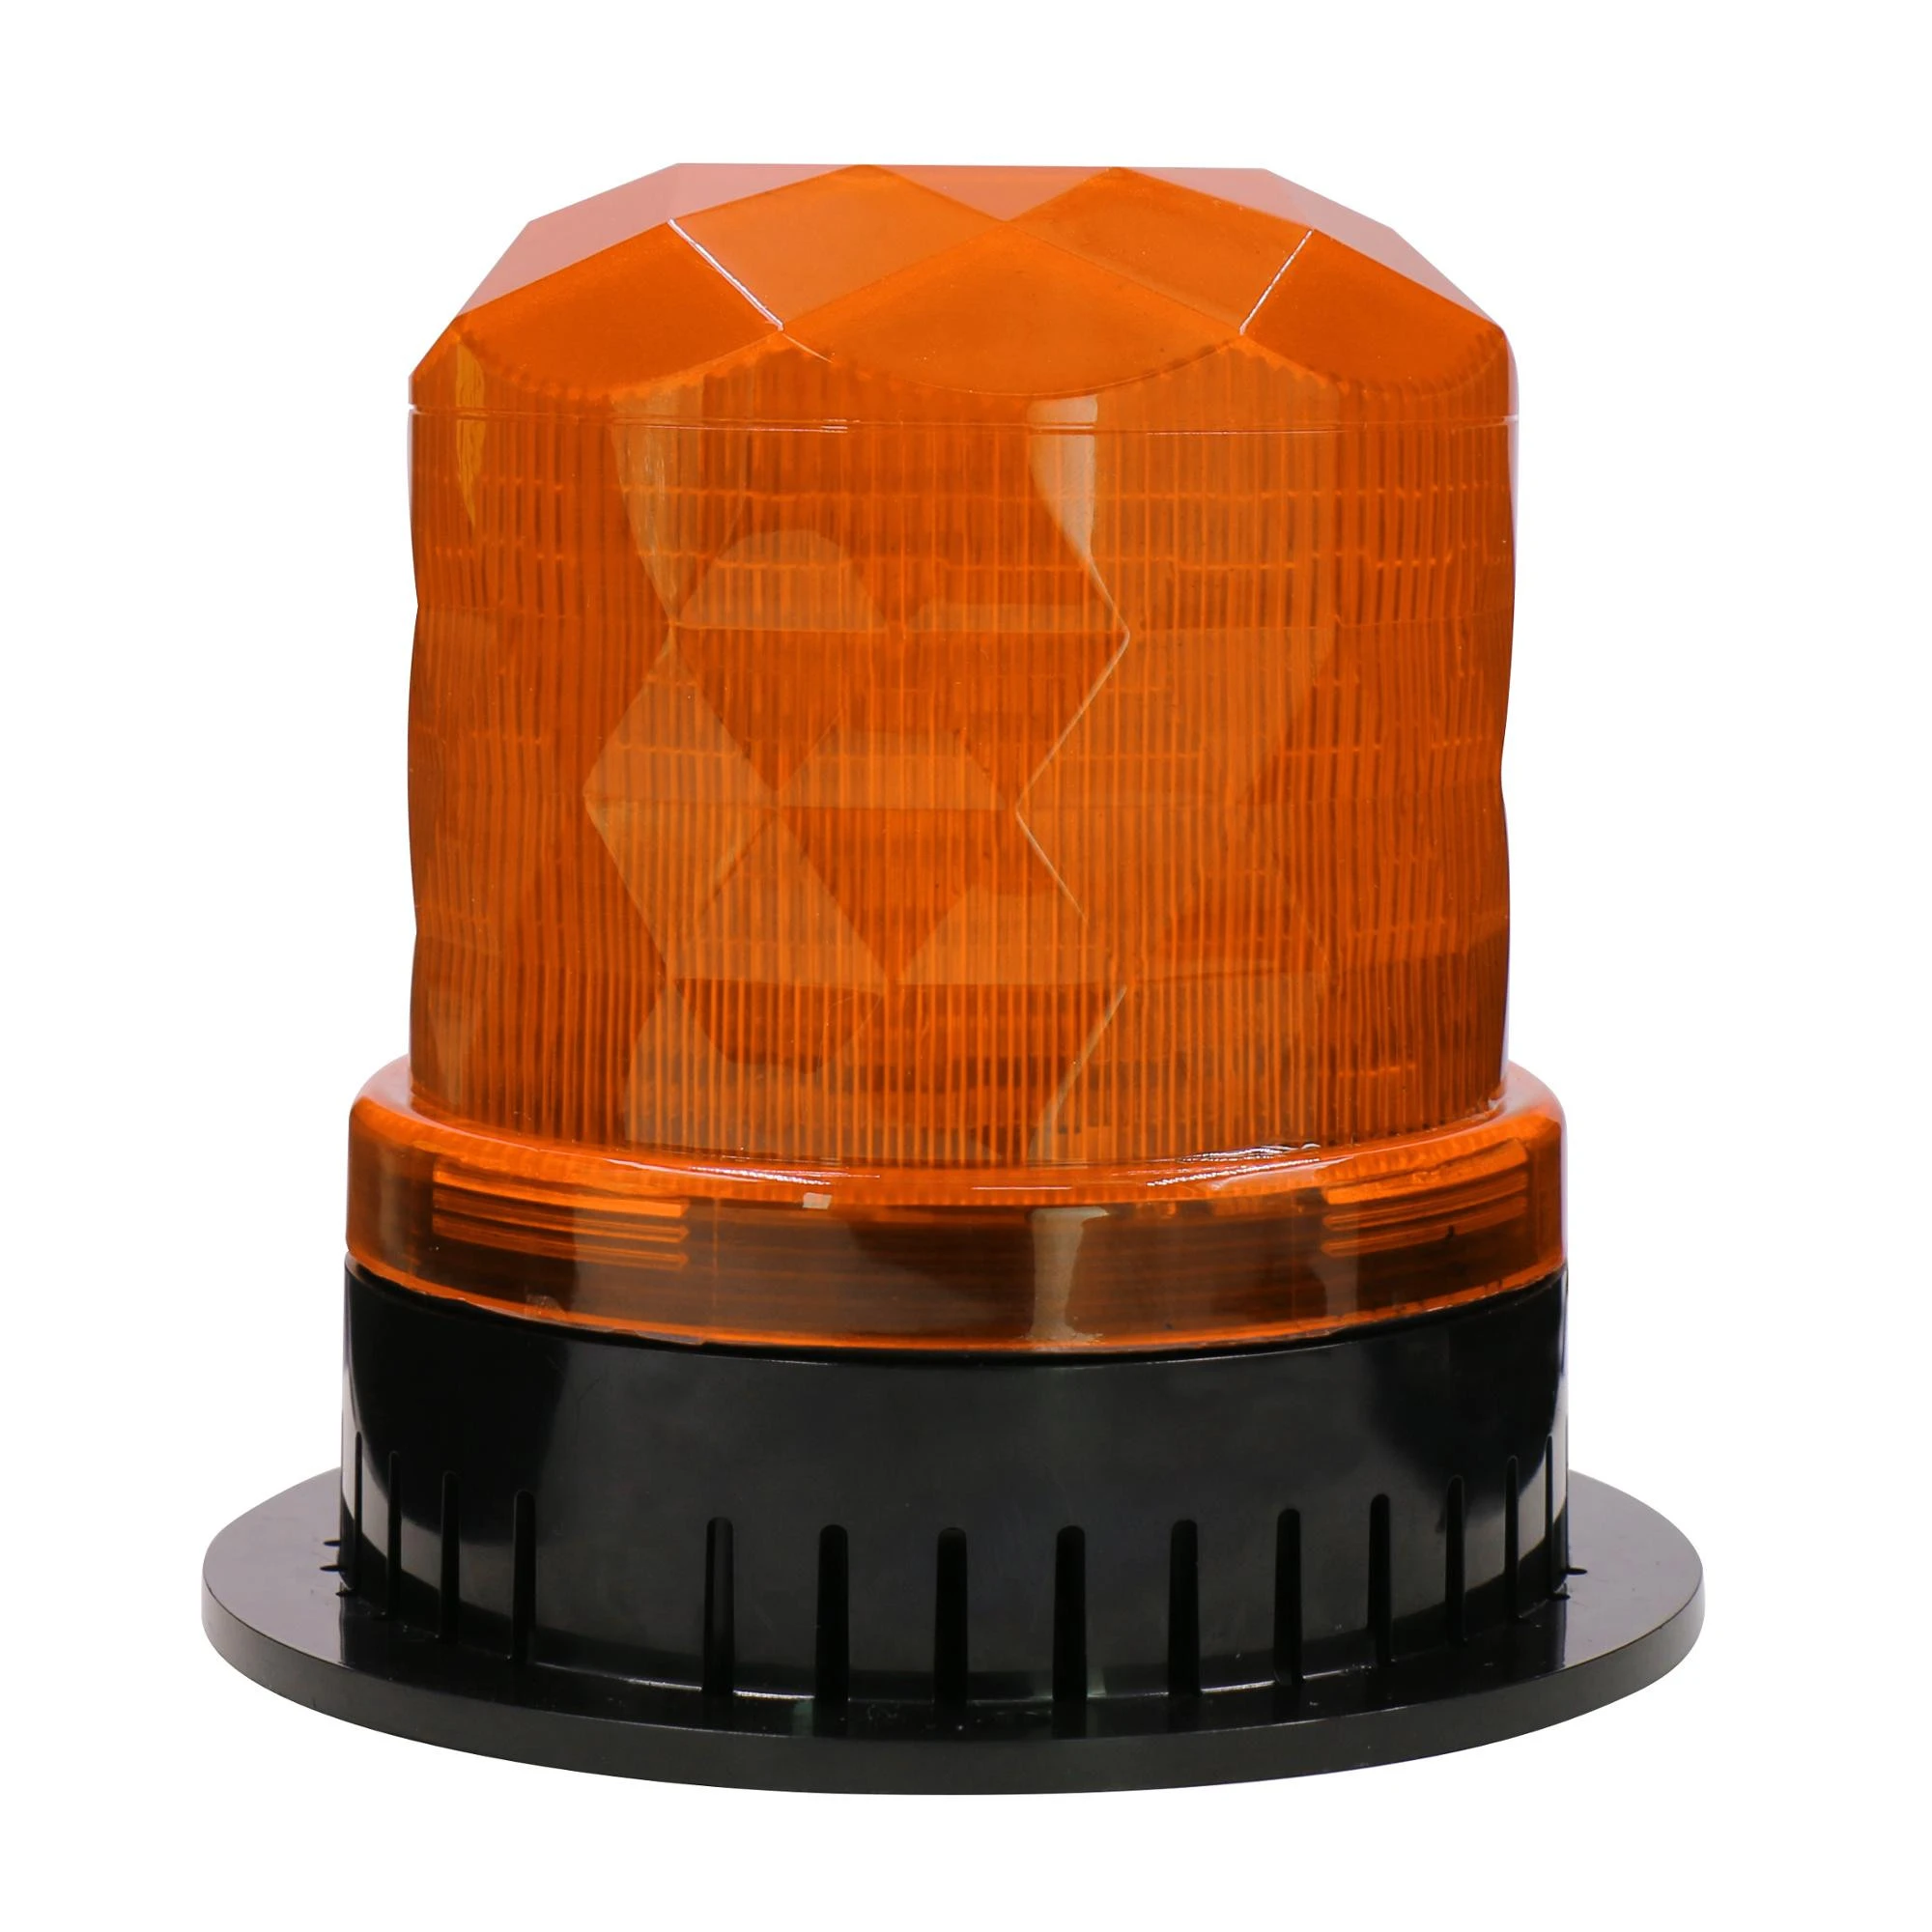 12V rotating led safety lighting rotary warning beacon light for heavy duty farm agriculture mining excavator crane fire truck